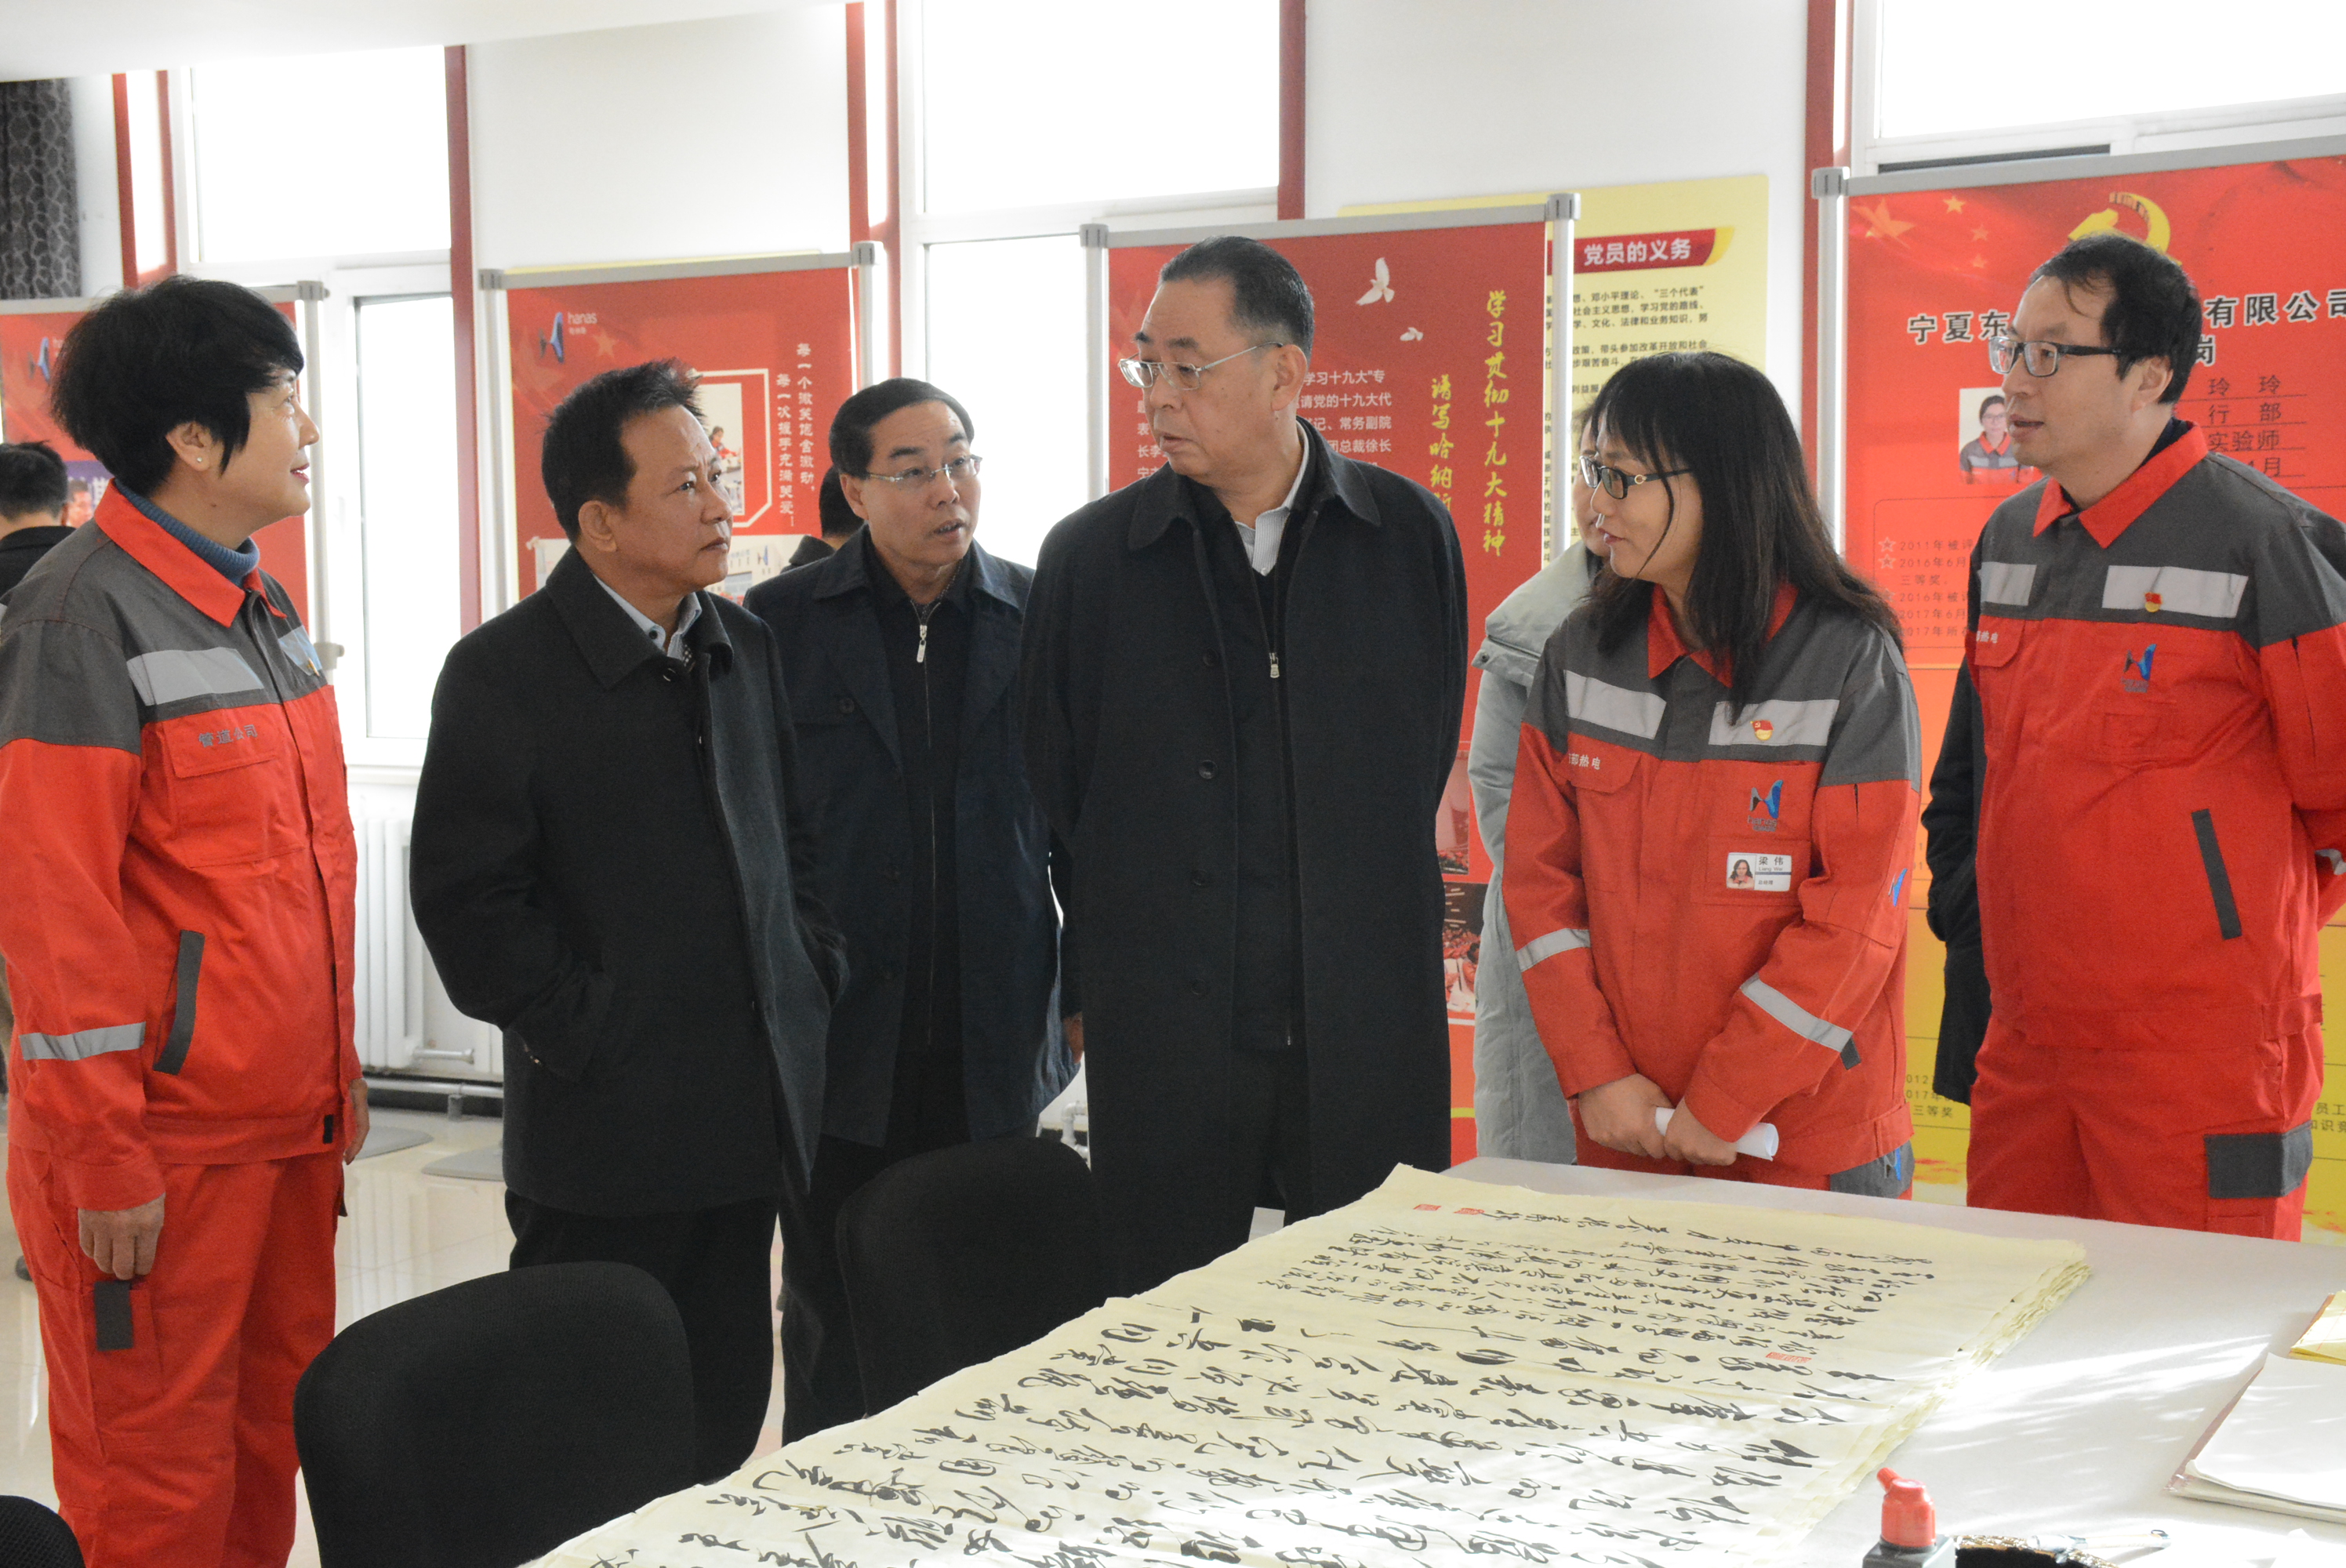 Secretary Jiang Zhigang went to Hanas Eastern Thermal Power Plant to conduct investigation and promote the organic integration and co-frequency resonance of Party building and enterprise development